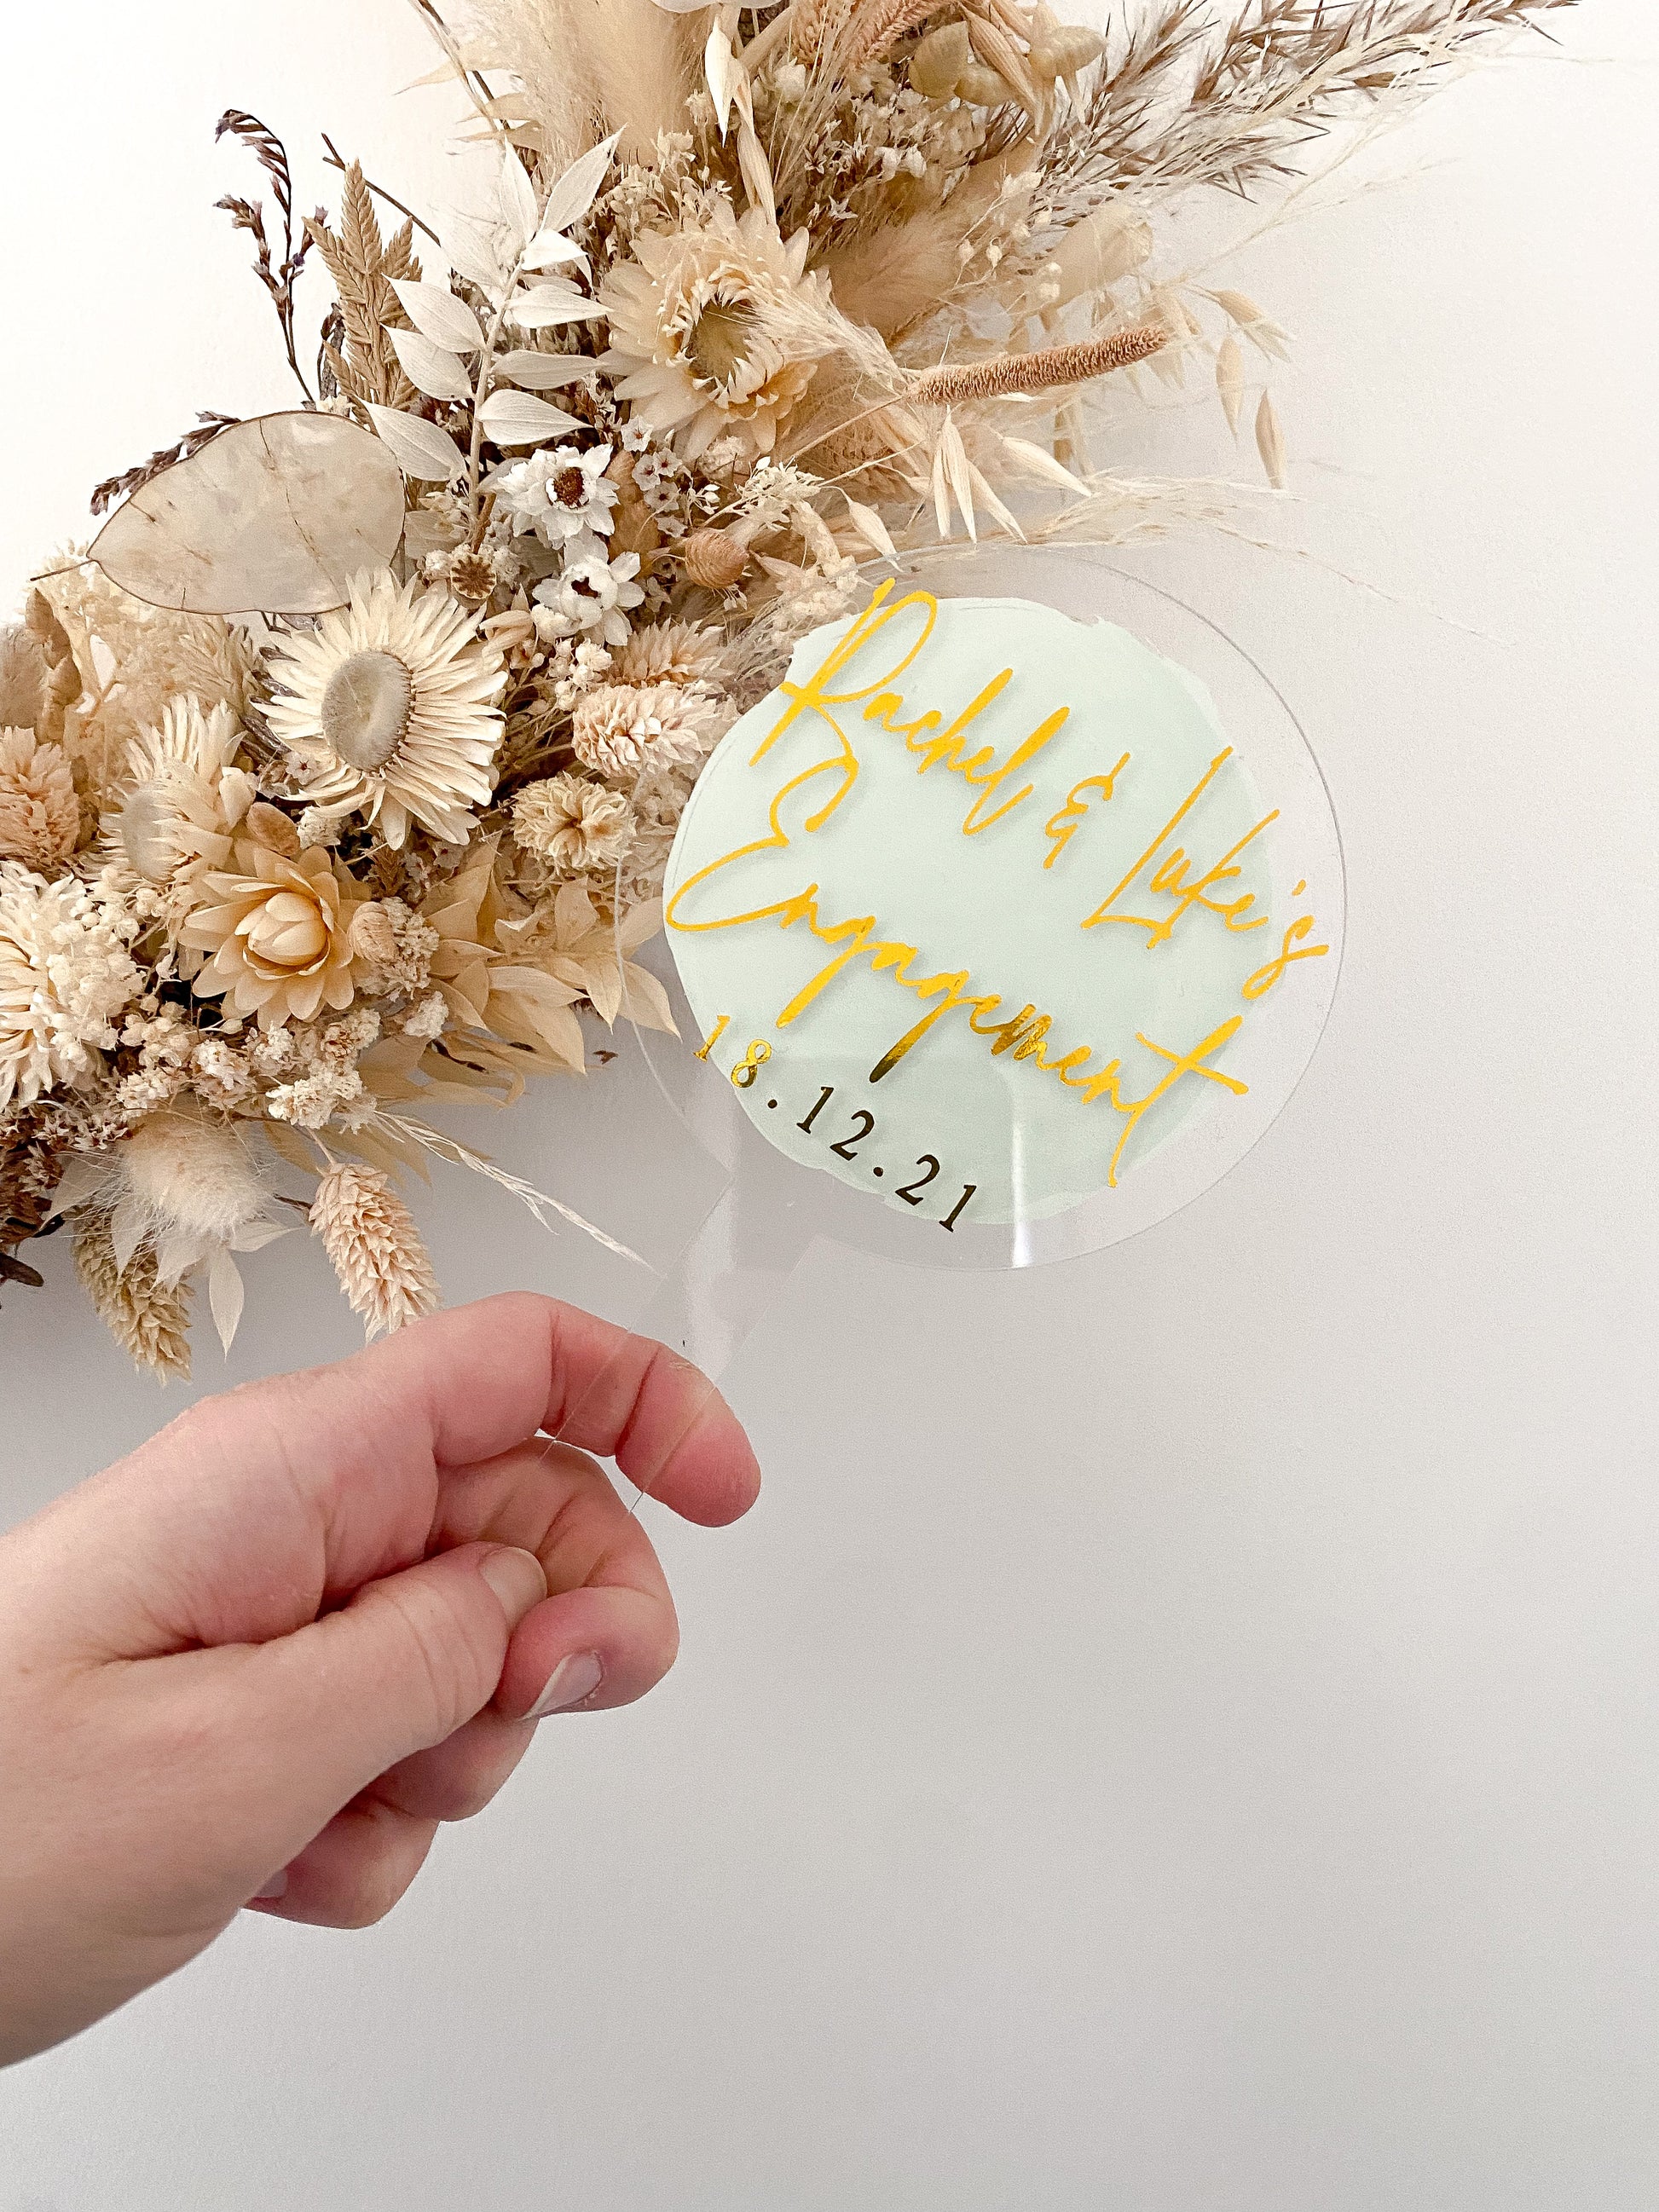 Engagement cake topper, personalised engagement cake topper, date, engagement date, happy engagement, acrylic engagement cake topper with the couples names and engagement date